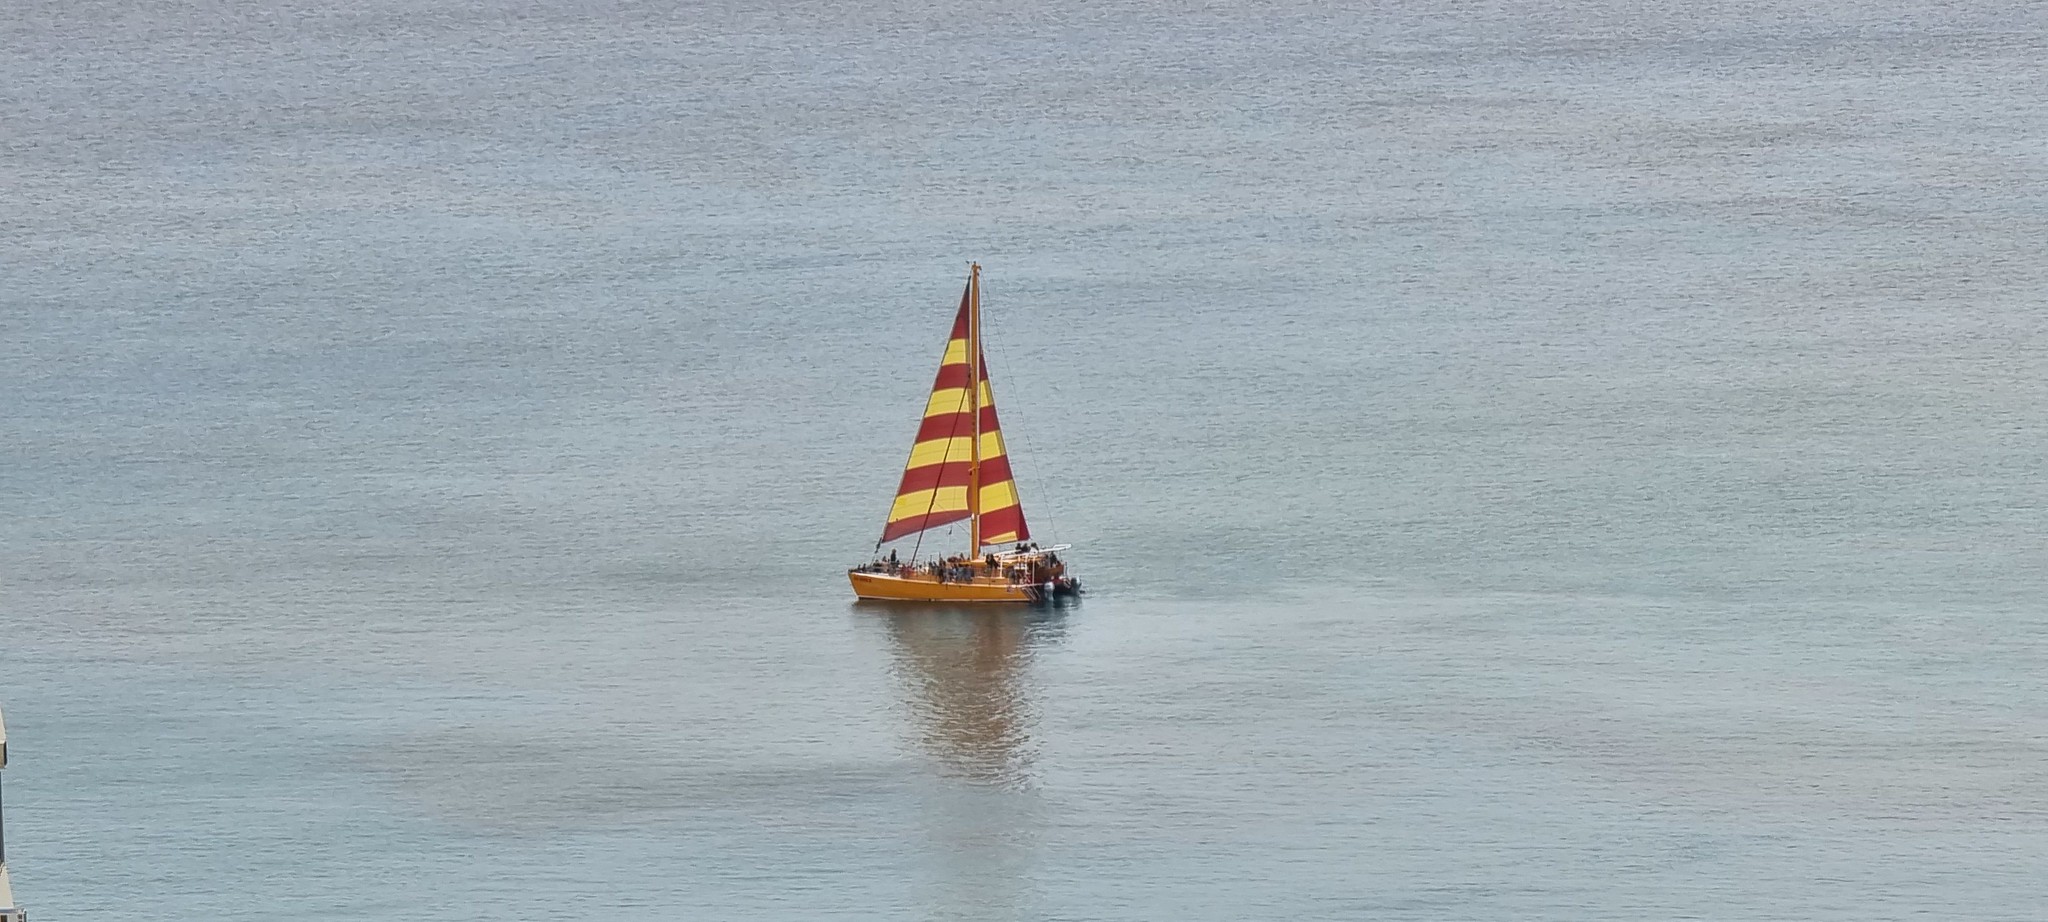 A colourful yacht viewed from room 3304 of the Hilton Waikiki Beach